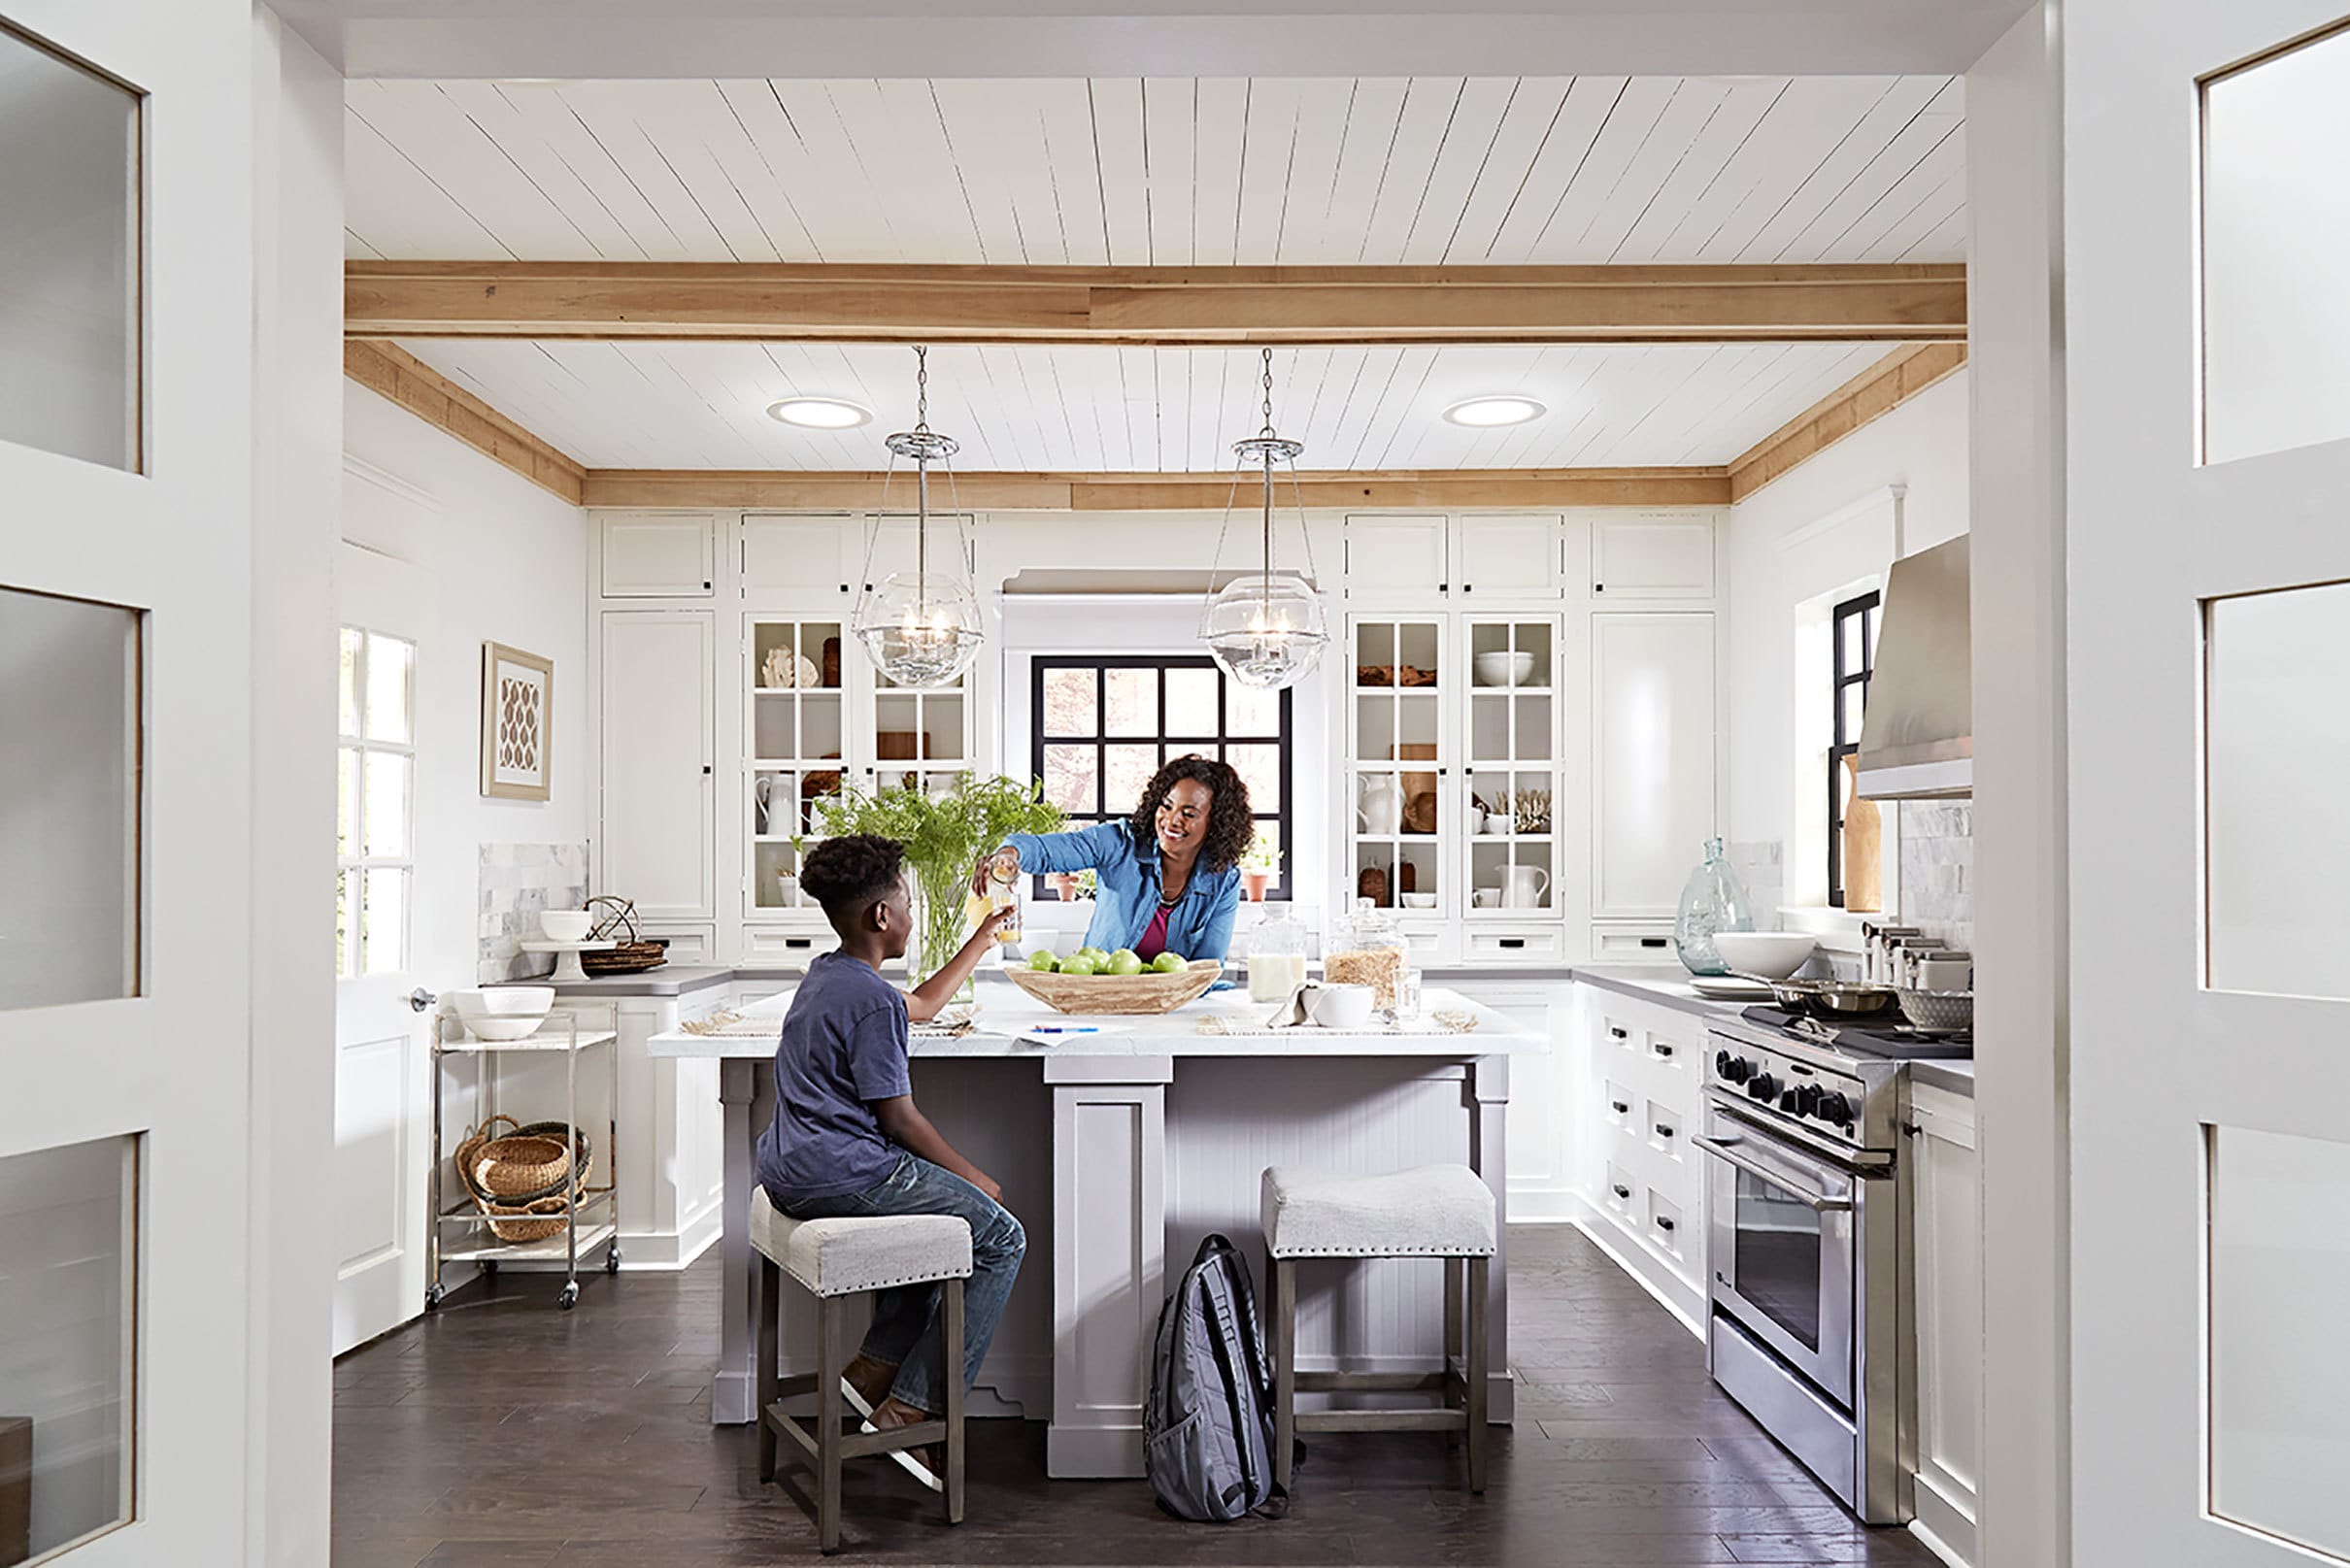 Two Sun tunnel skylights brighten a white and natural wood kitchen